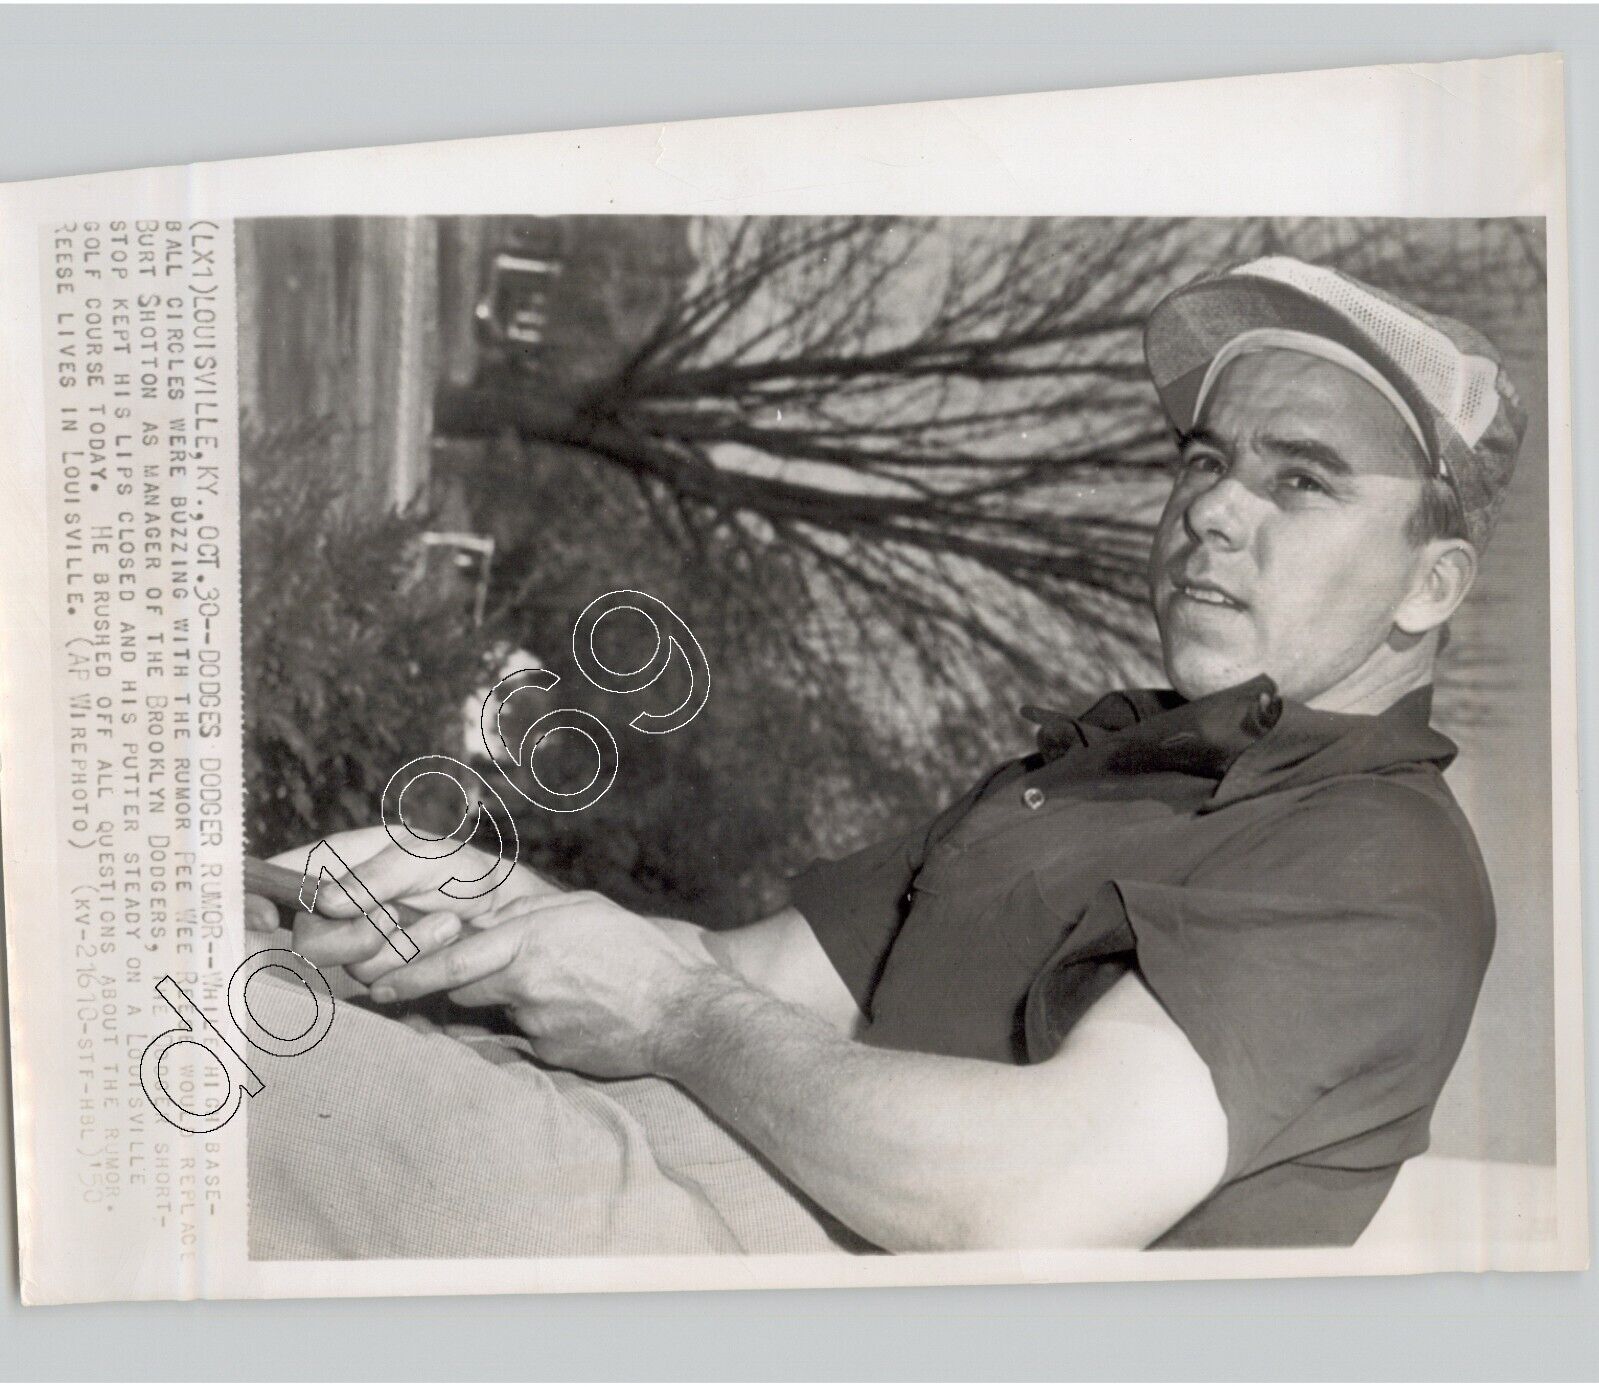 US Baseball Player Dodgers PEE WEE REESE Play GOLF @ Louisville 1950 Press Photo